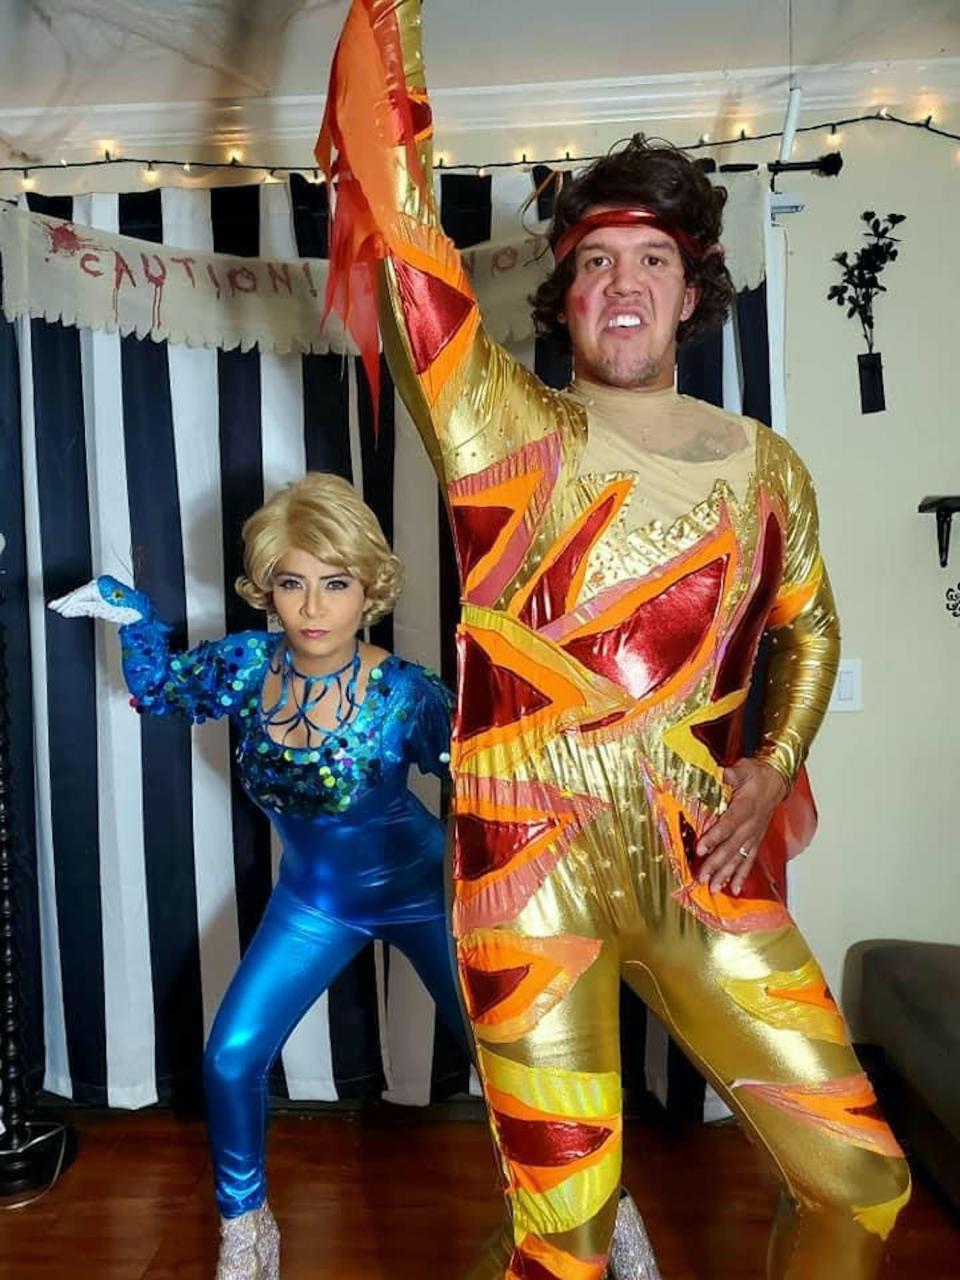 A couple dressed as Chazz Michael Michaels and Jimmy MacElroy pose for a photo.